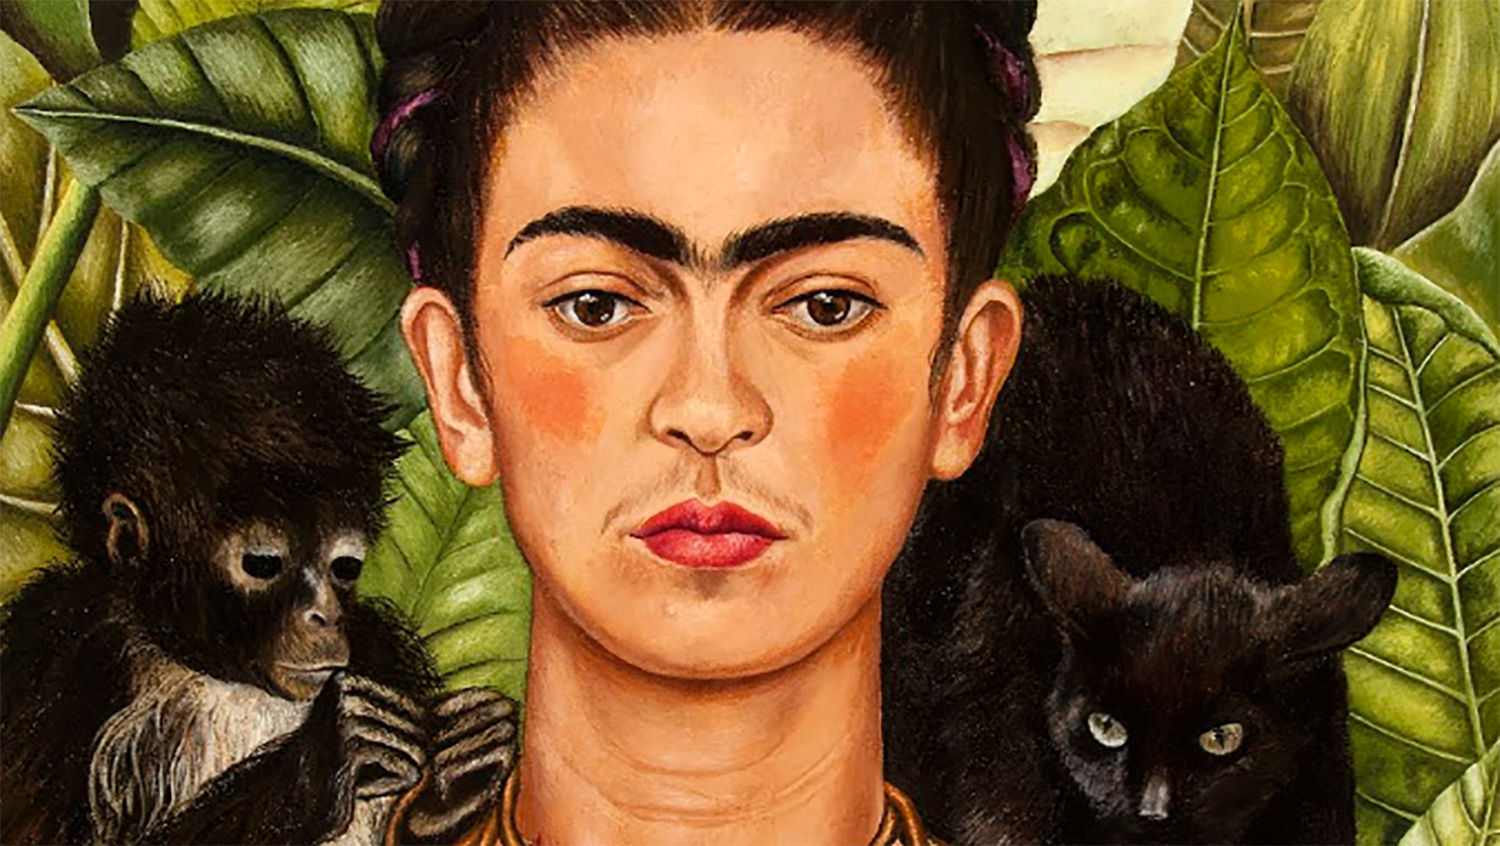 Portrait made by Frida featuring her pet monkey and black cat. Surrouned by large leaves. Her expression is serious.